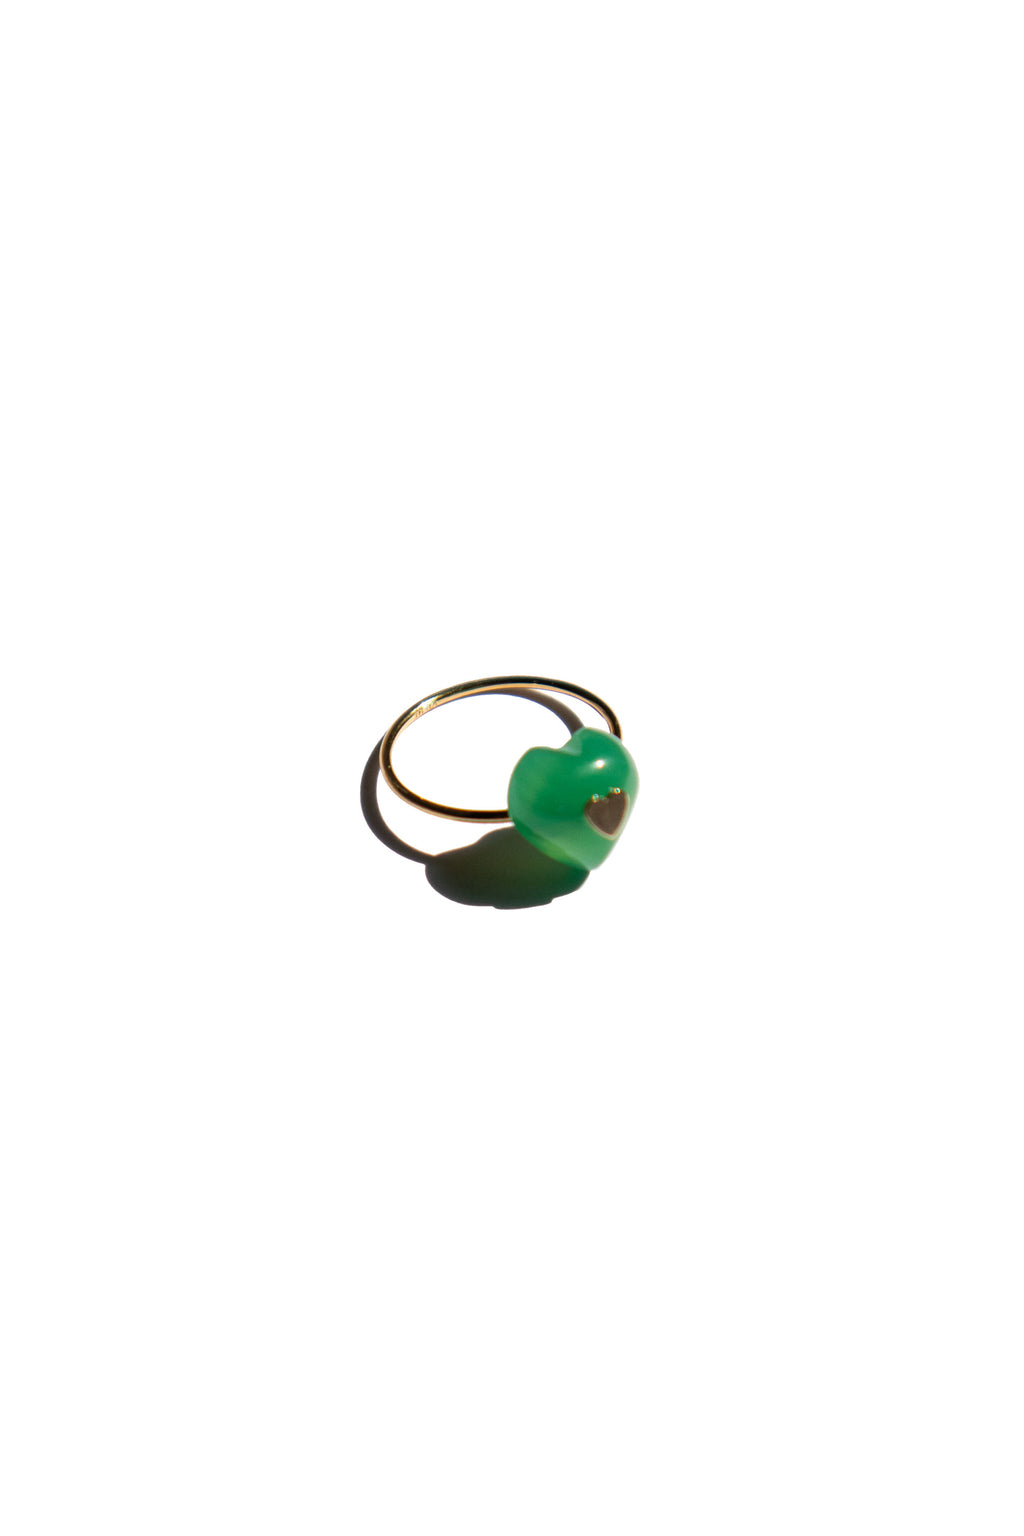 seree-green-heart-ring-green-chalcedony-gold-plated-band